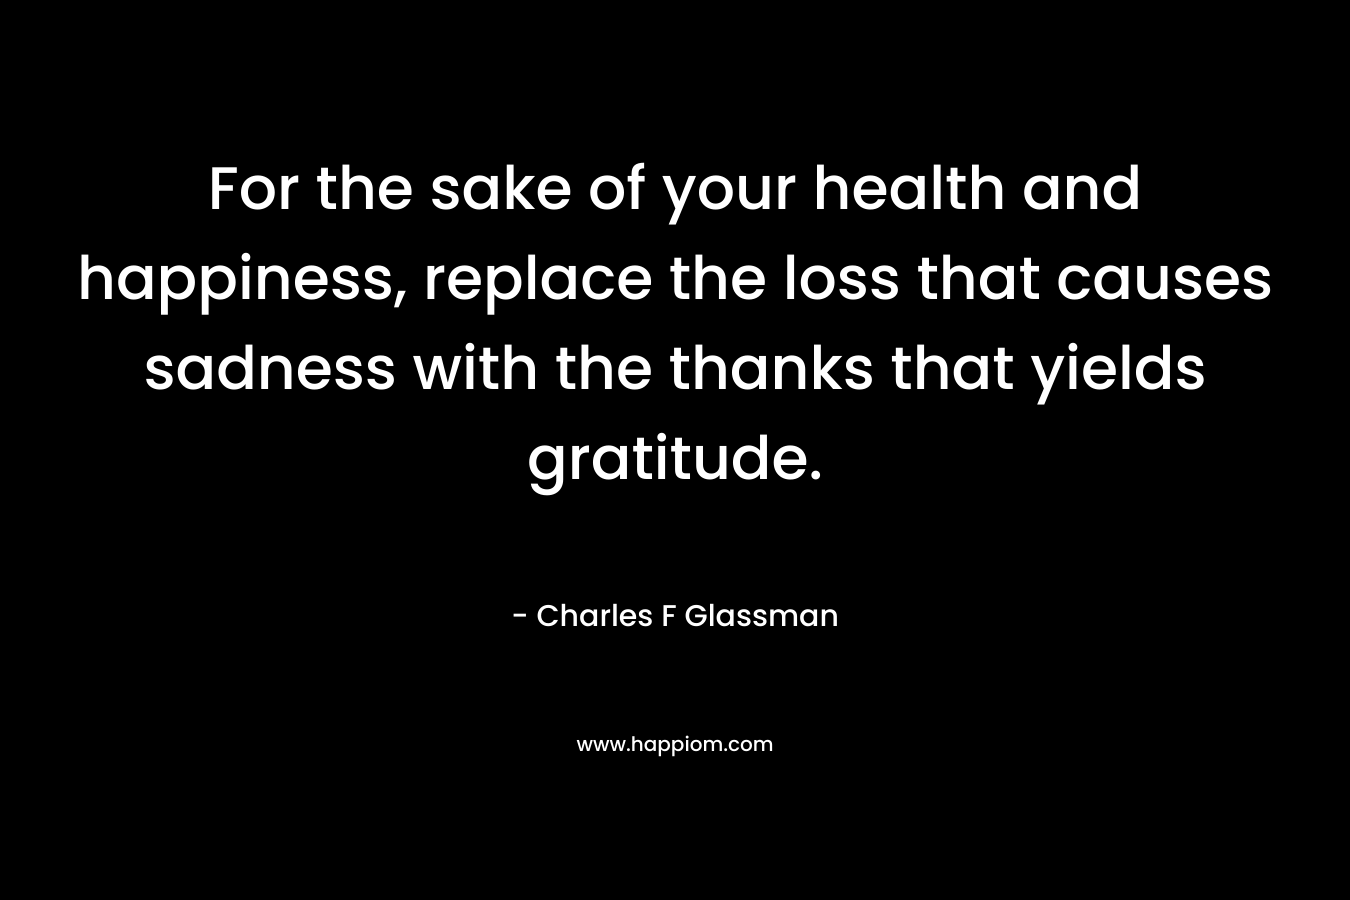 For the sake of your health and happiness, replace the loss that causes sadness with the thanks that yields gratitude.